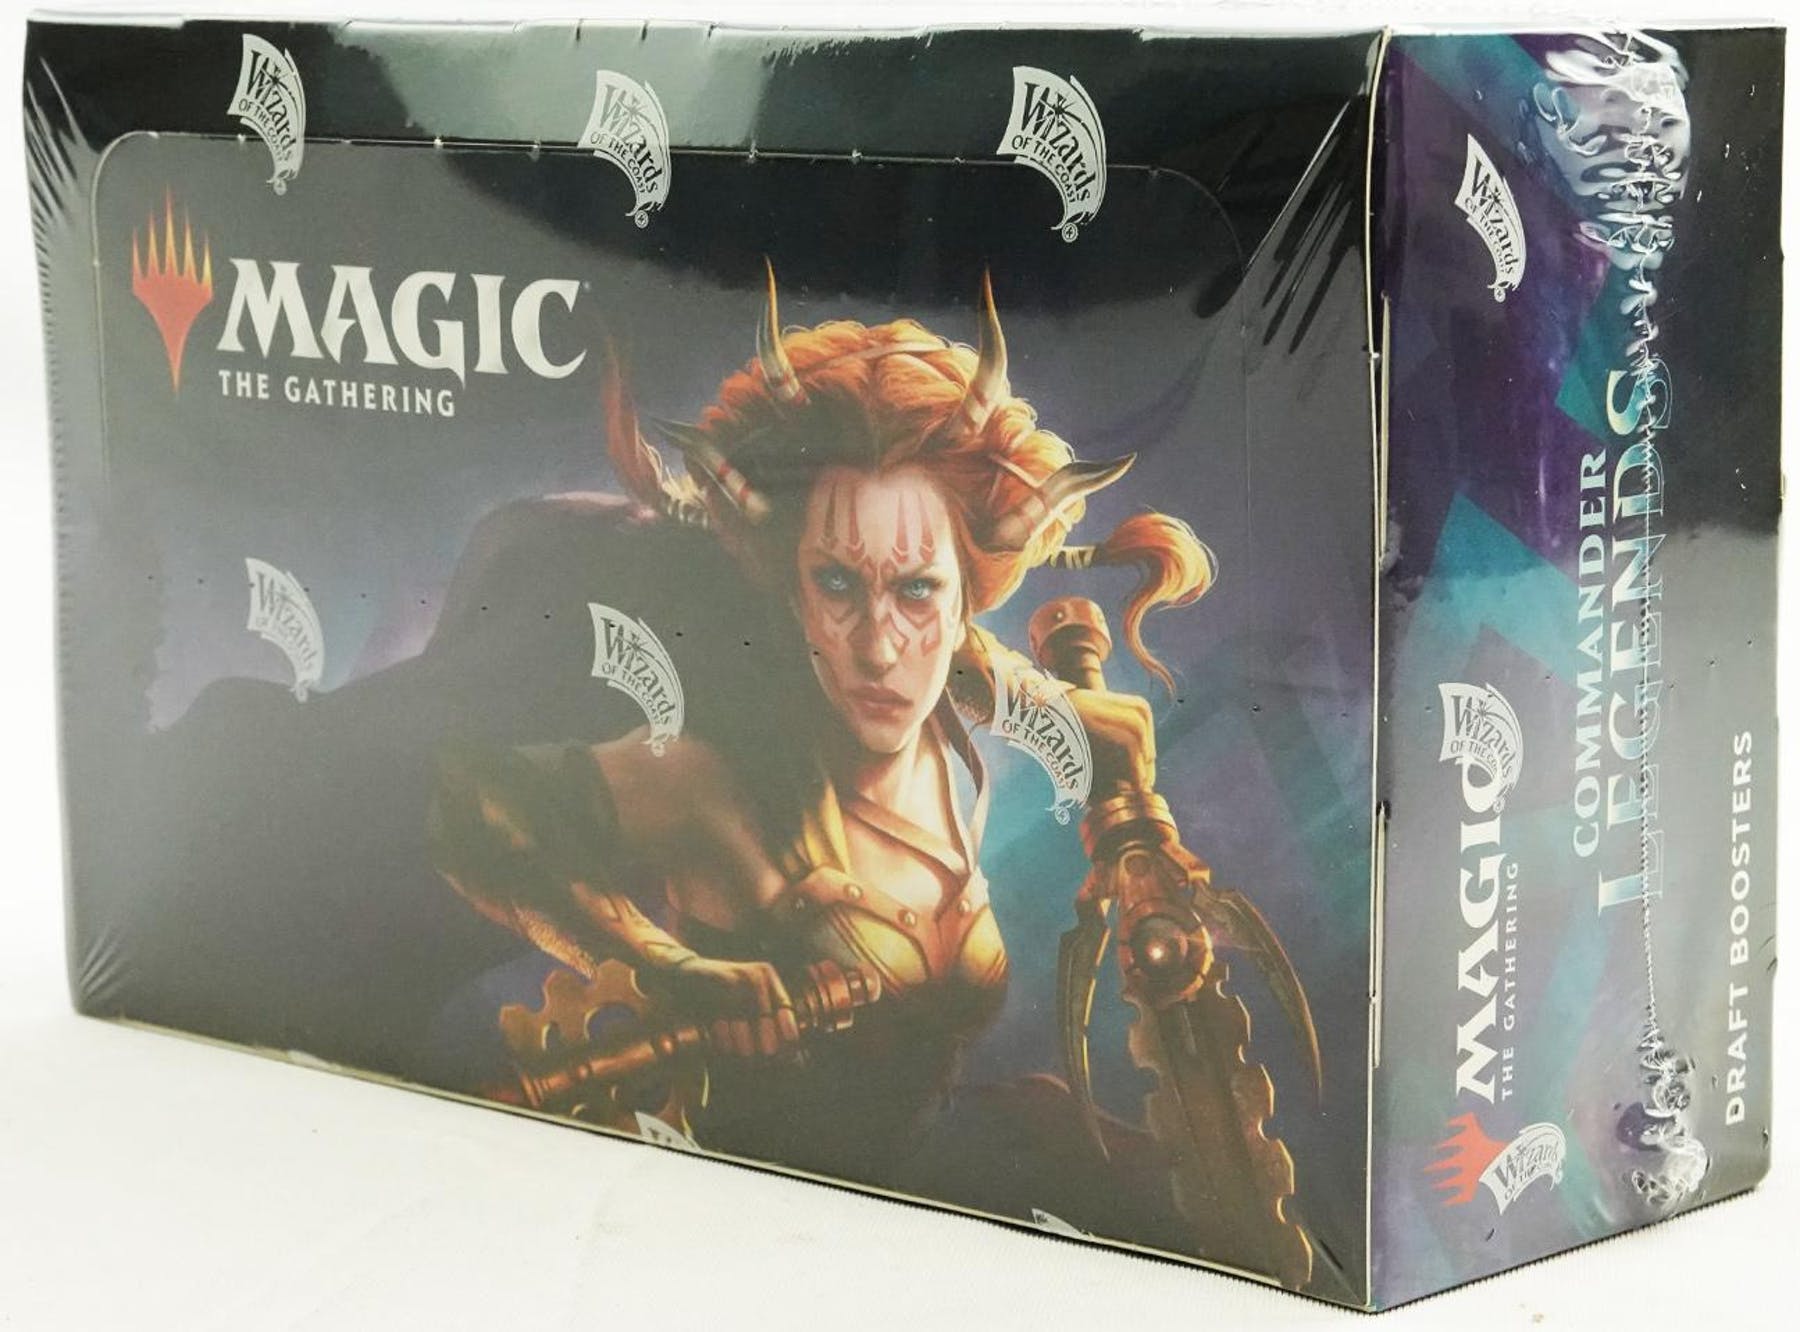 MTG – The Lord of the Rings: Tales of Middle-earth Draft Booster Box -  Labyrinth Games & Puzzles